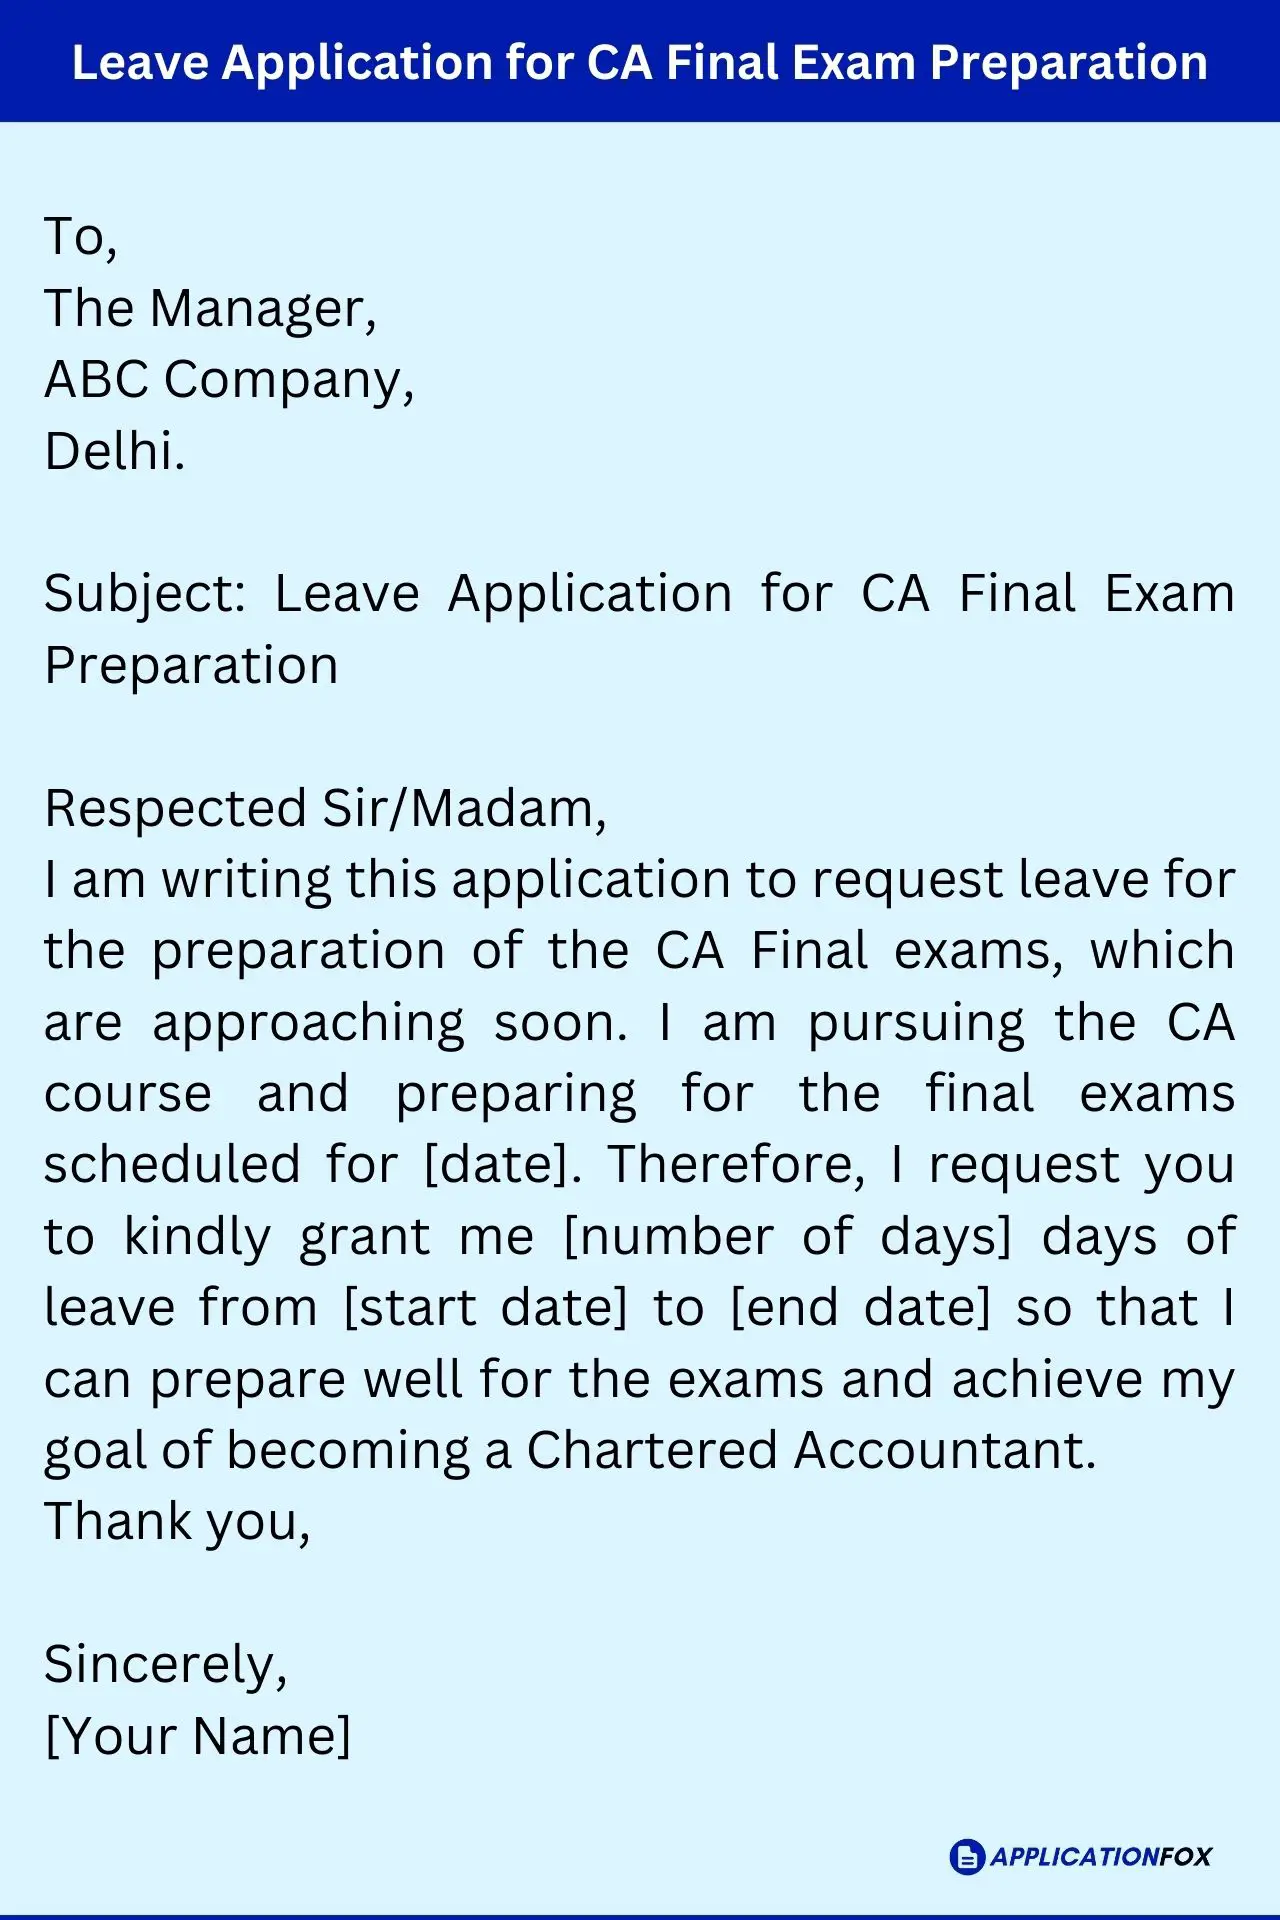 Leave Application for CA Final Exam Preparation